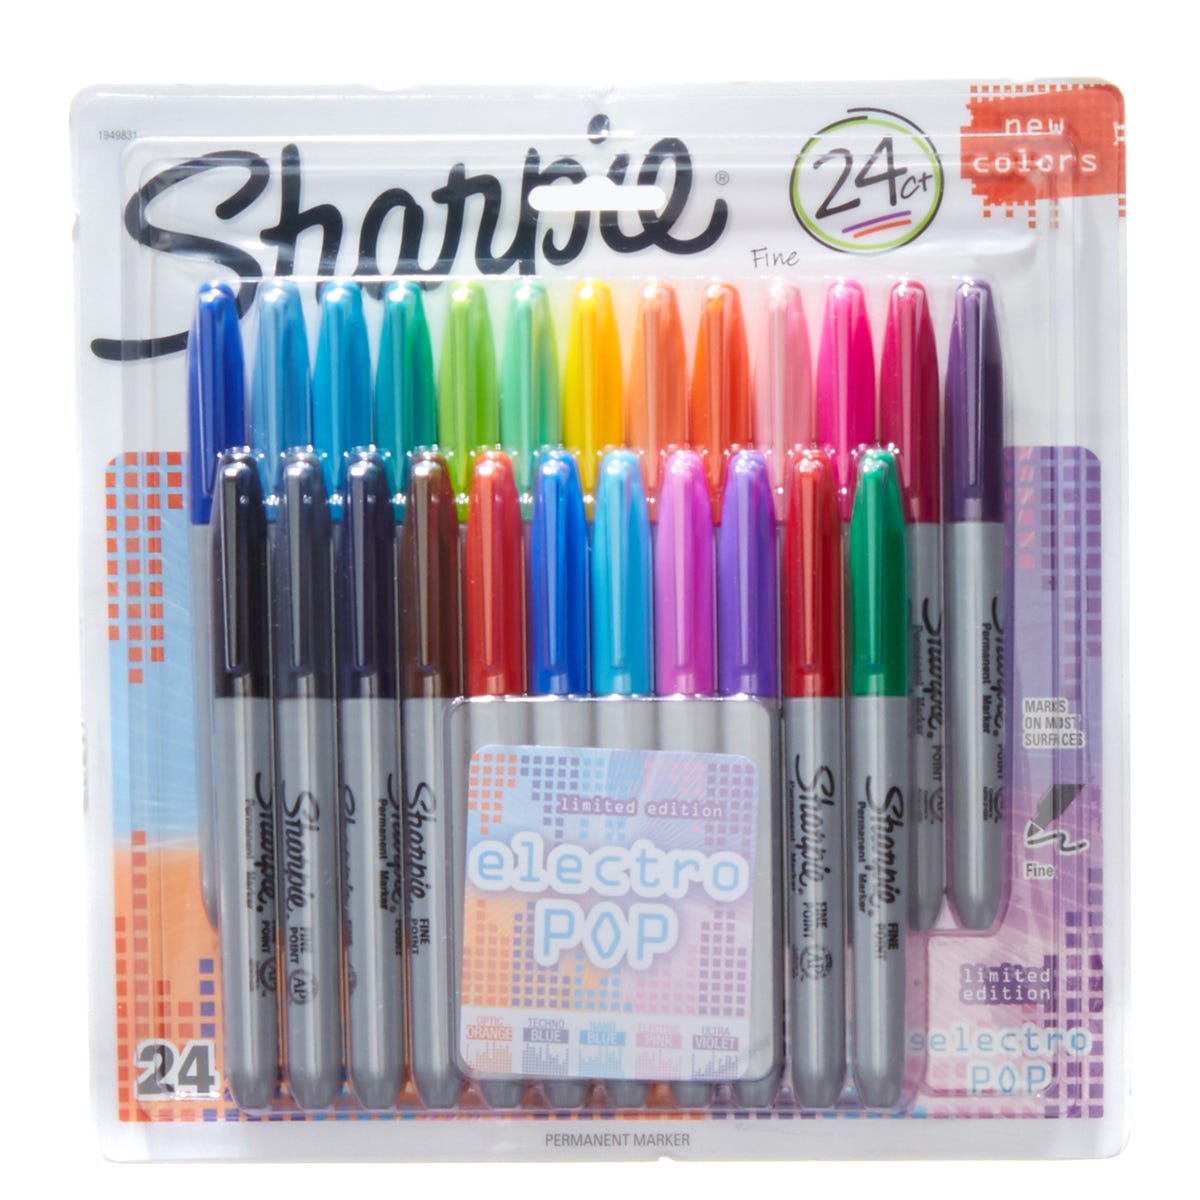 Sharpie Multi-coloured Fine Permanent Markers - Pack of 24